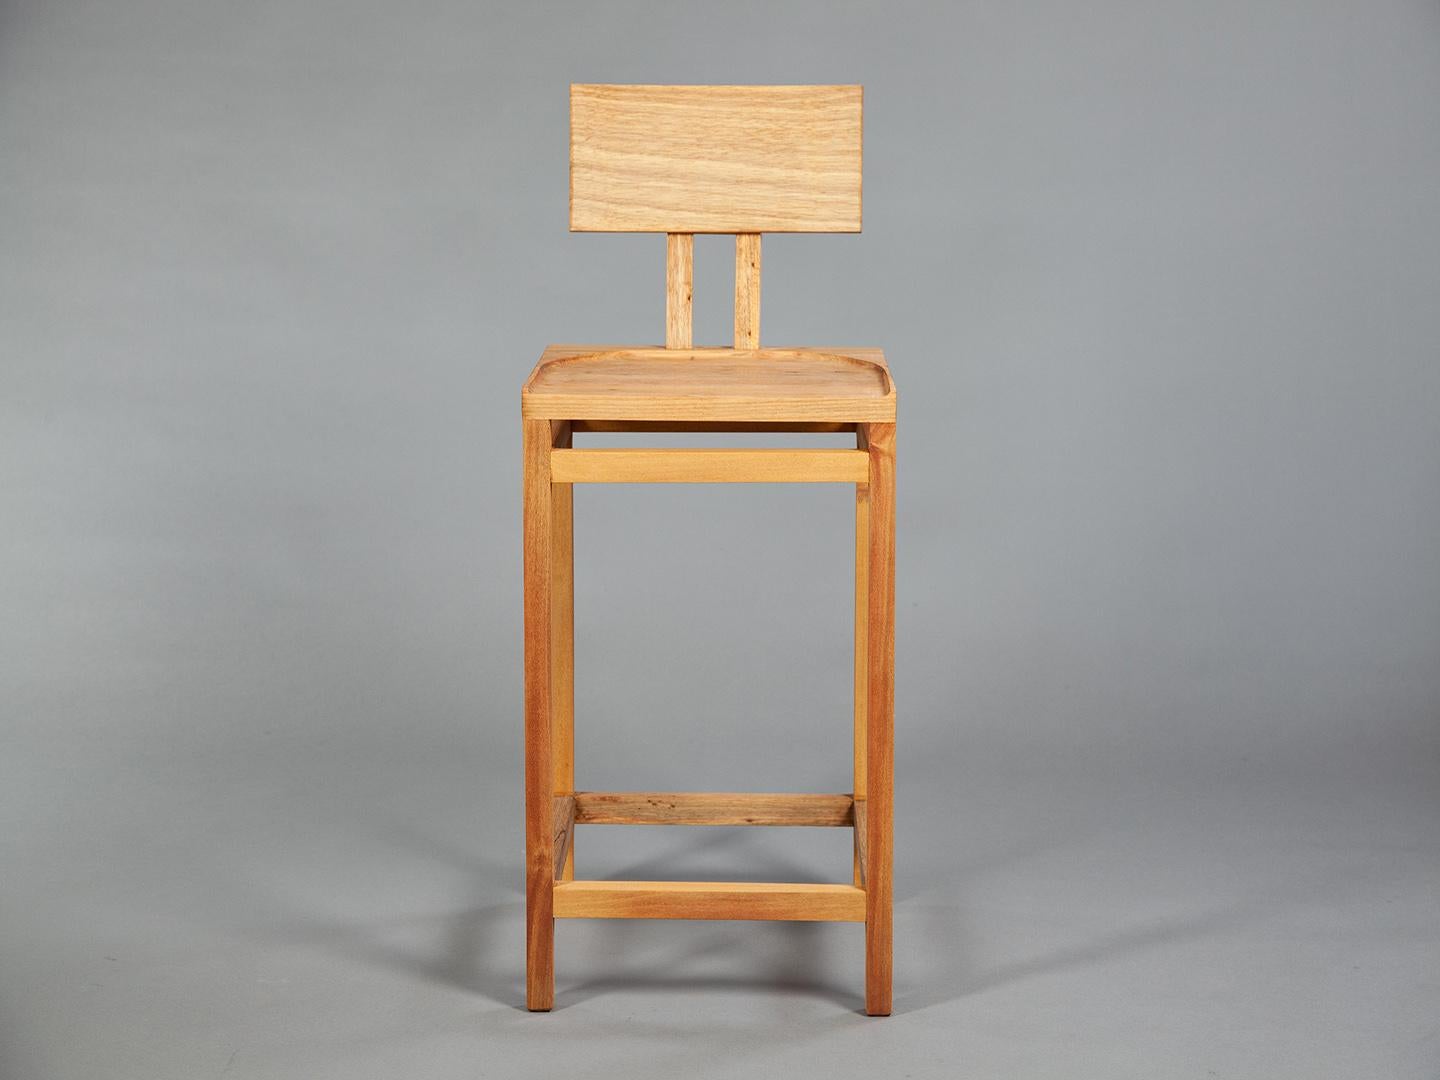 A stool version of the Simple chair is also entirely crafted from solid wood. Robust, durable, and comfortable, it features clean lines and a carved seat. It can be produced in tauri, jequitibá, sucupira, freijó, or imbuia.

The designer
Amilcar